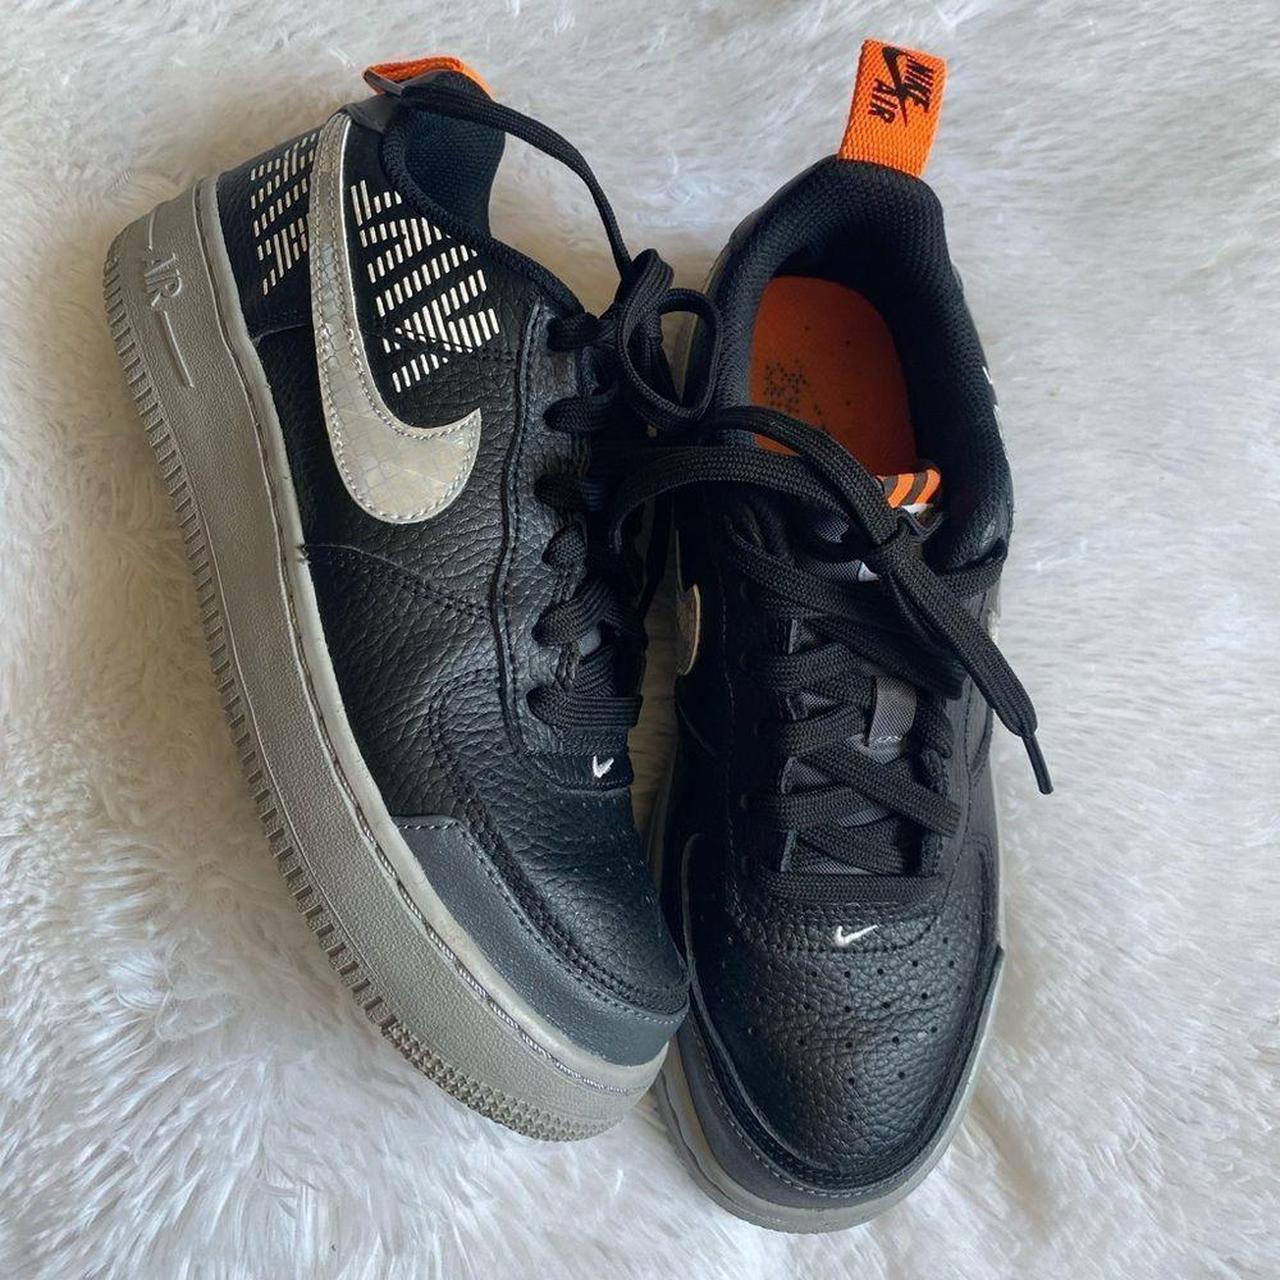 Nike Air Force 1 LV8 2 GS Under Construction Black Gray Sneakers